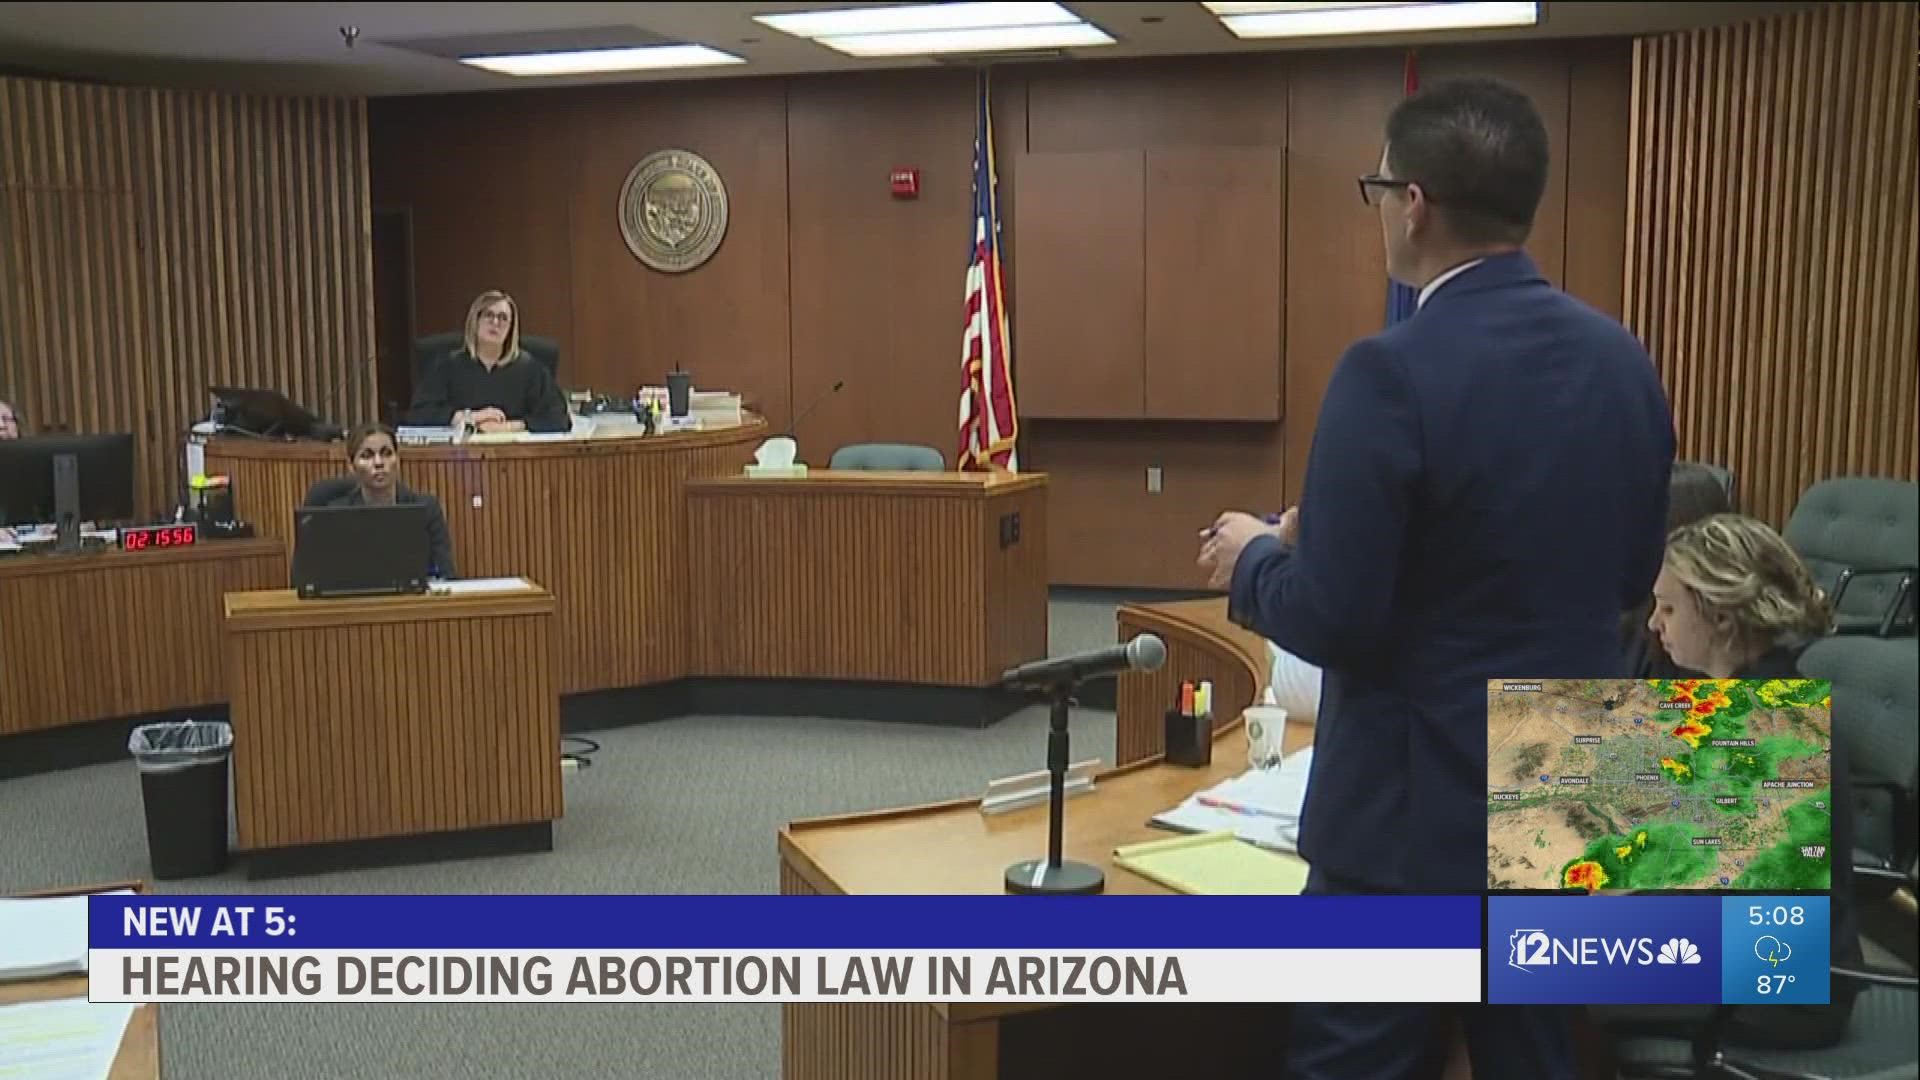 A Pima County judge heard arguments today on the future of Arizona's abortion laws now that the Supreme Court has overturned Roe v. Wade.